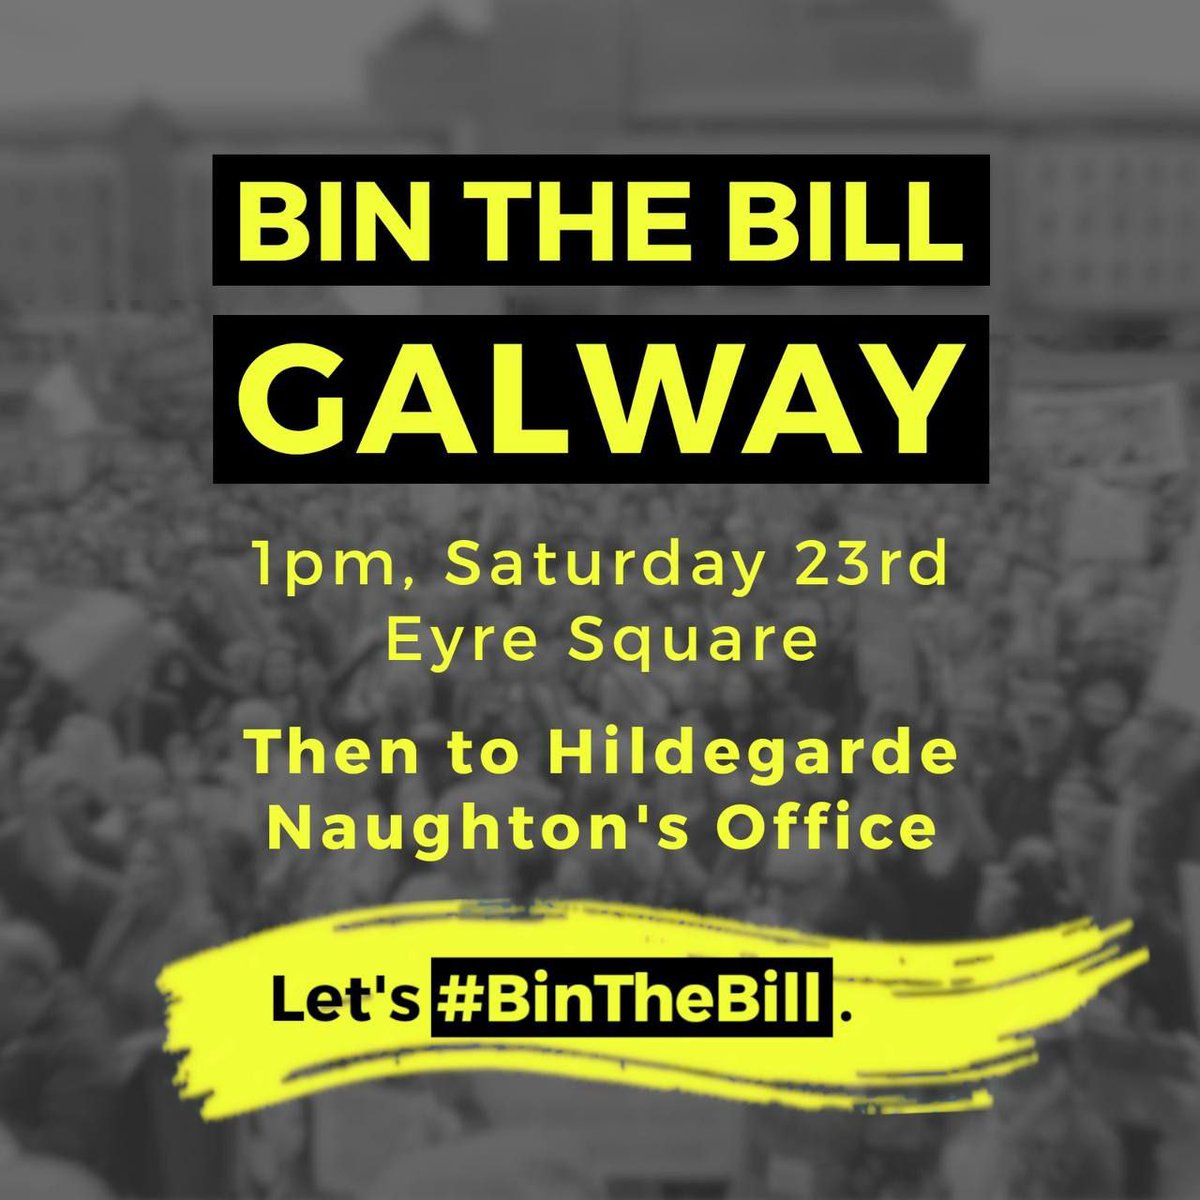 The Irish Government must drop the ridiculous #HateSpeech bill. McEntee has lost the trust of the  electorate. This bill will NEVER be accepted by the Irish people. #NoHateSpeechLaws
#ResignMcEntee
#BinTheBill
#TraitorsOut
#EnoughIsEnough